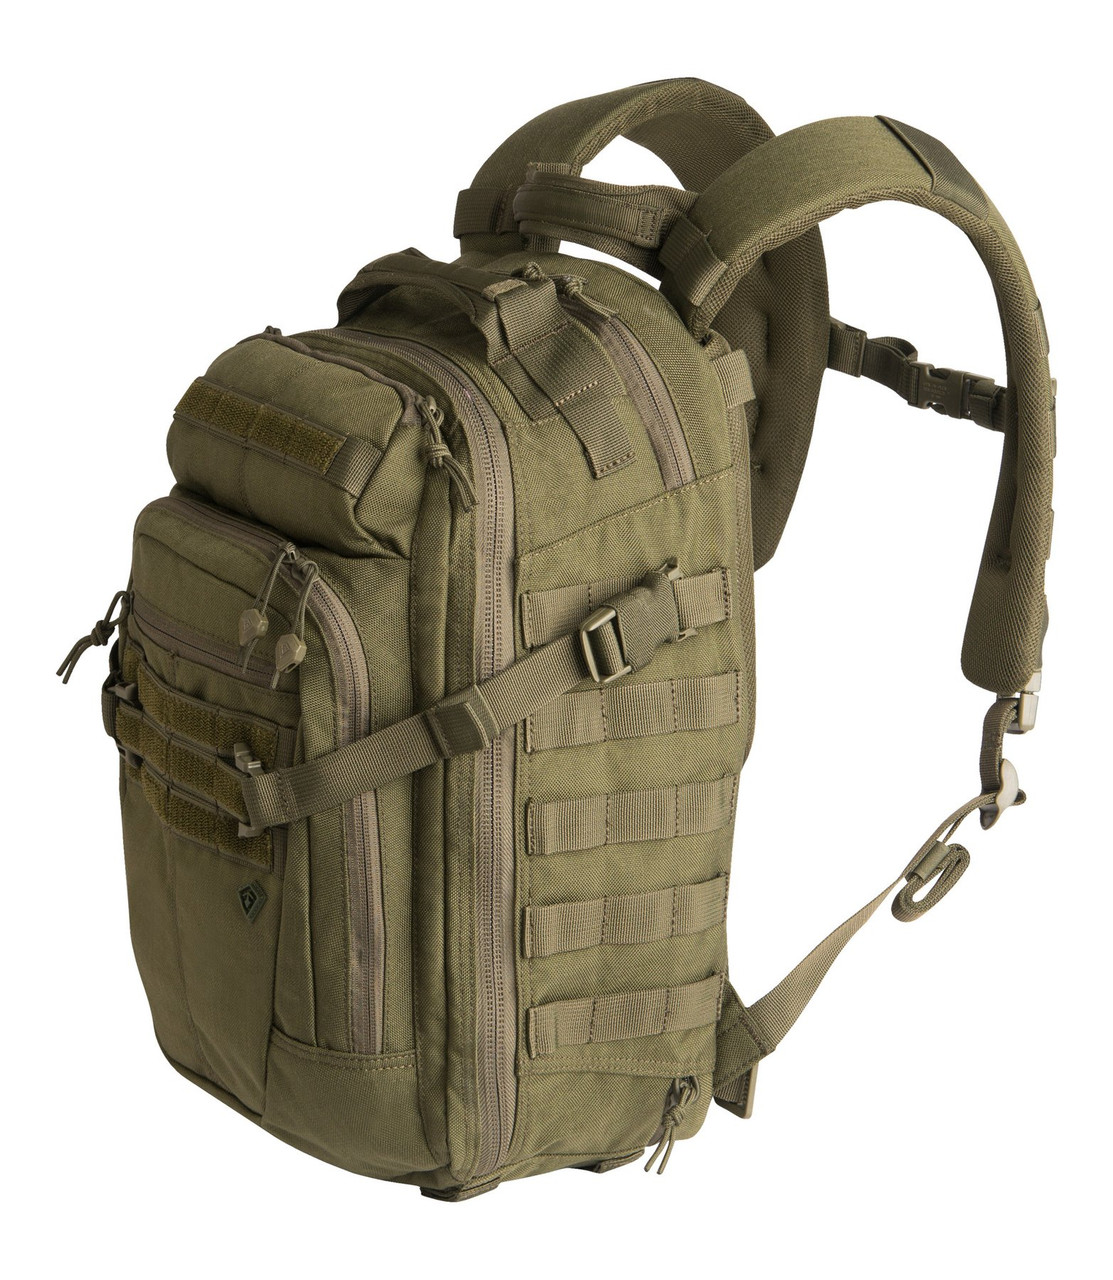 Specialist Half Day Backpack - 25 Litre - First Tactical